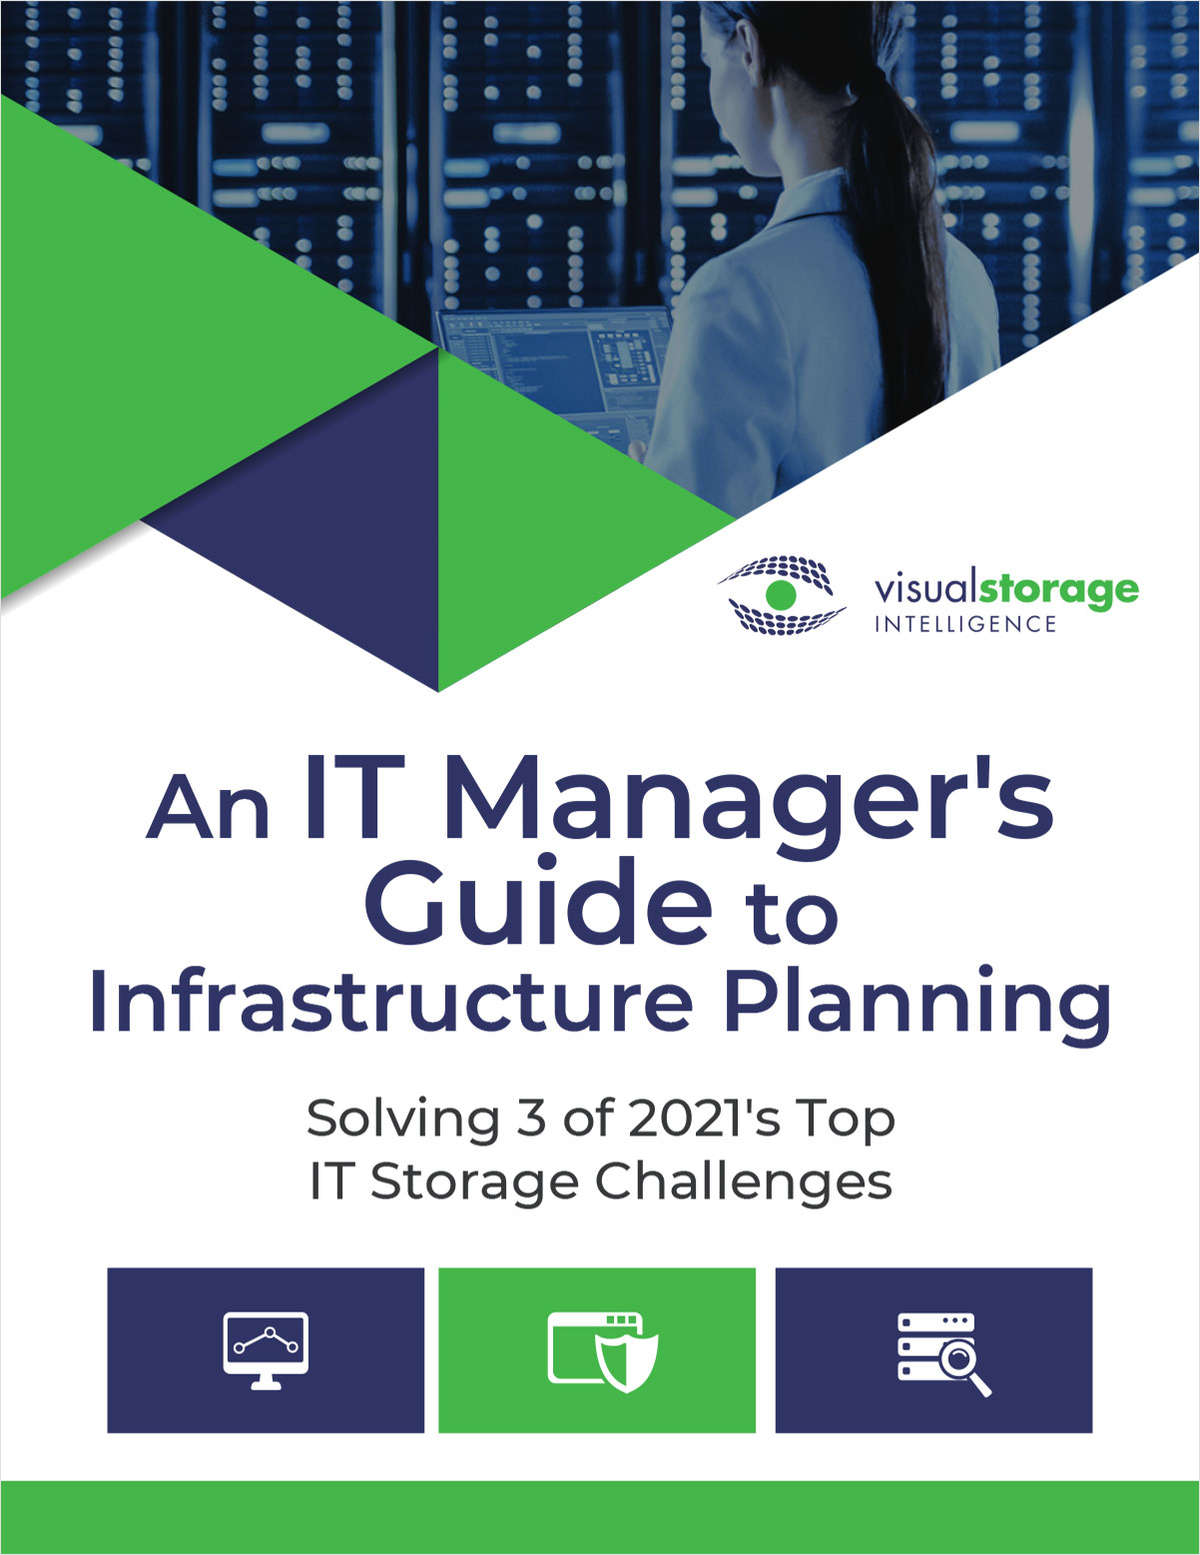 Storage Challenges Guide for IT Managers